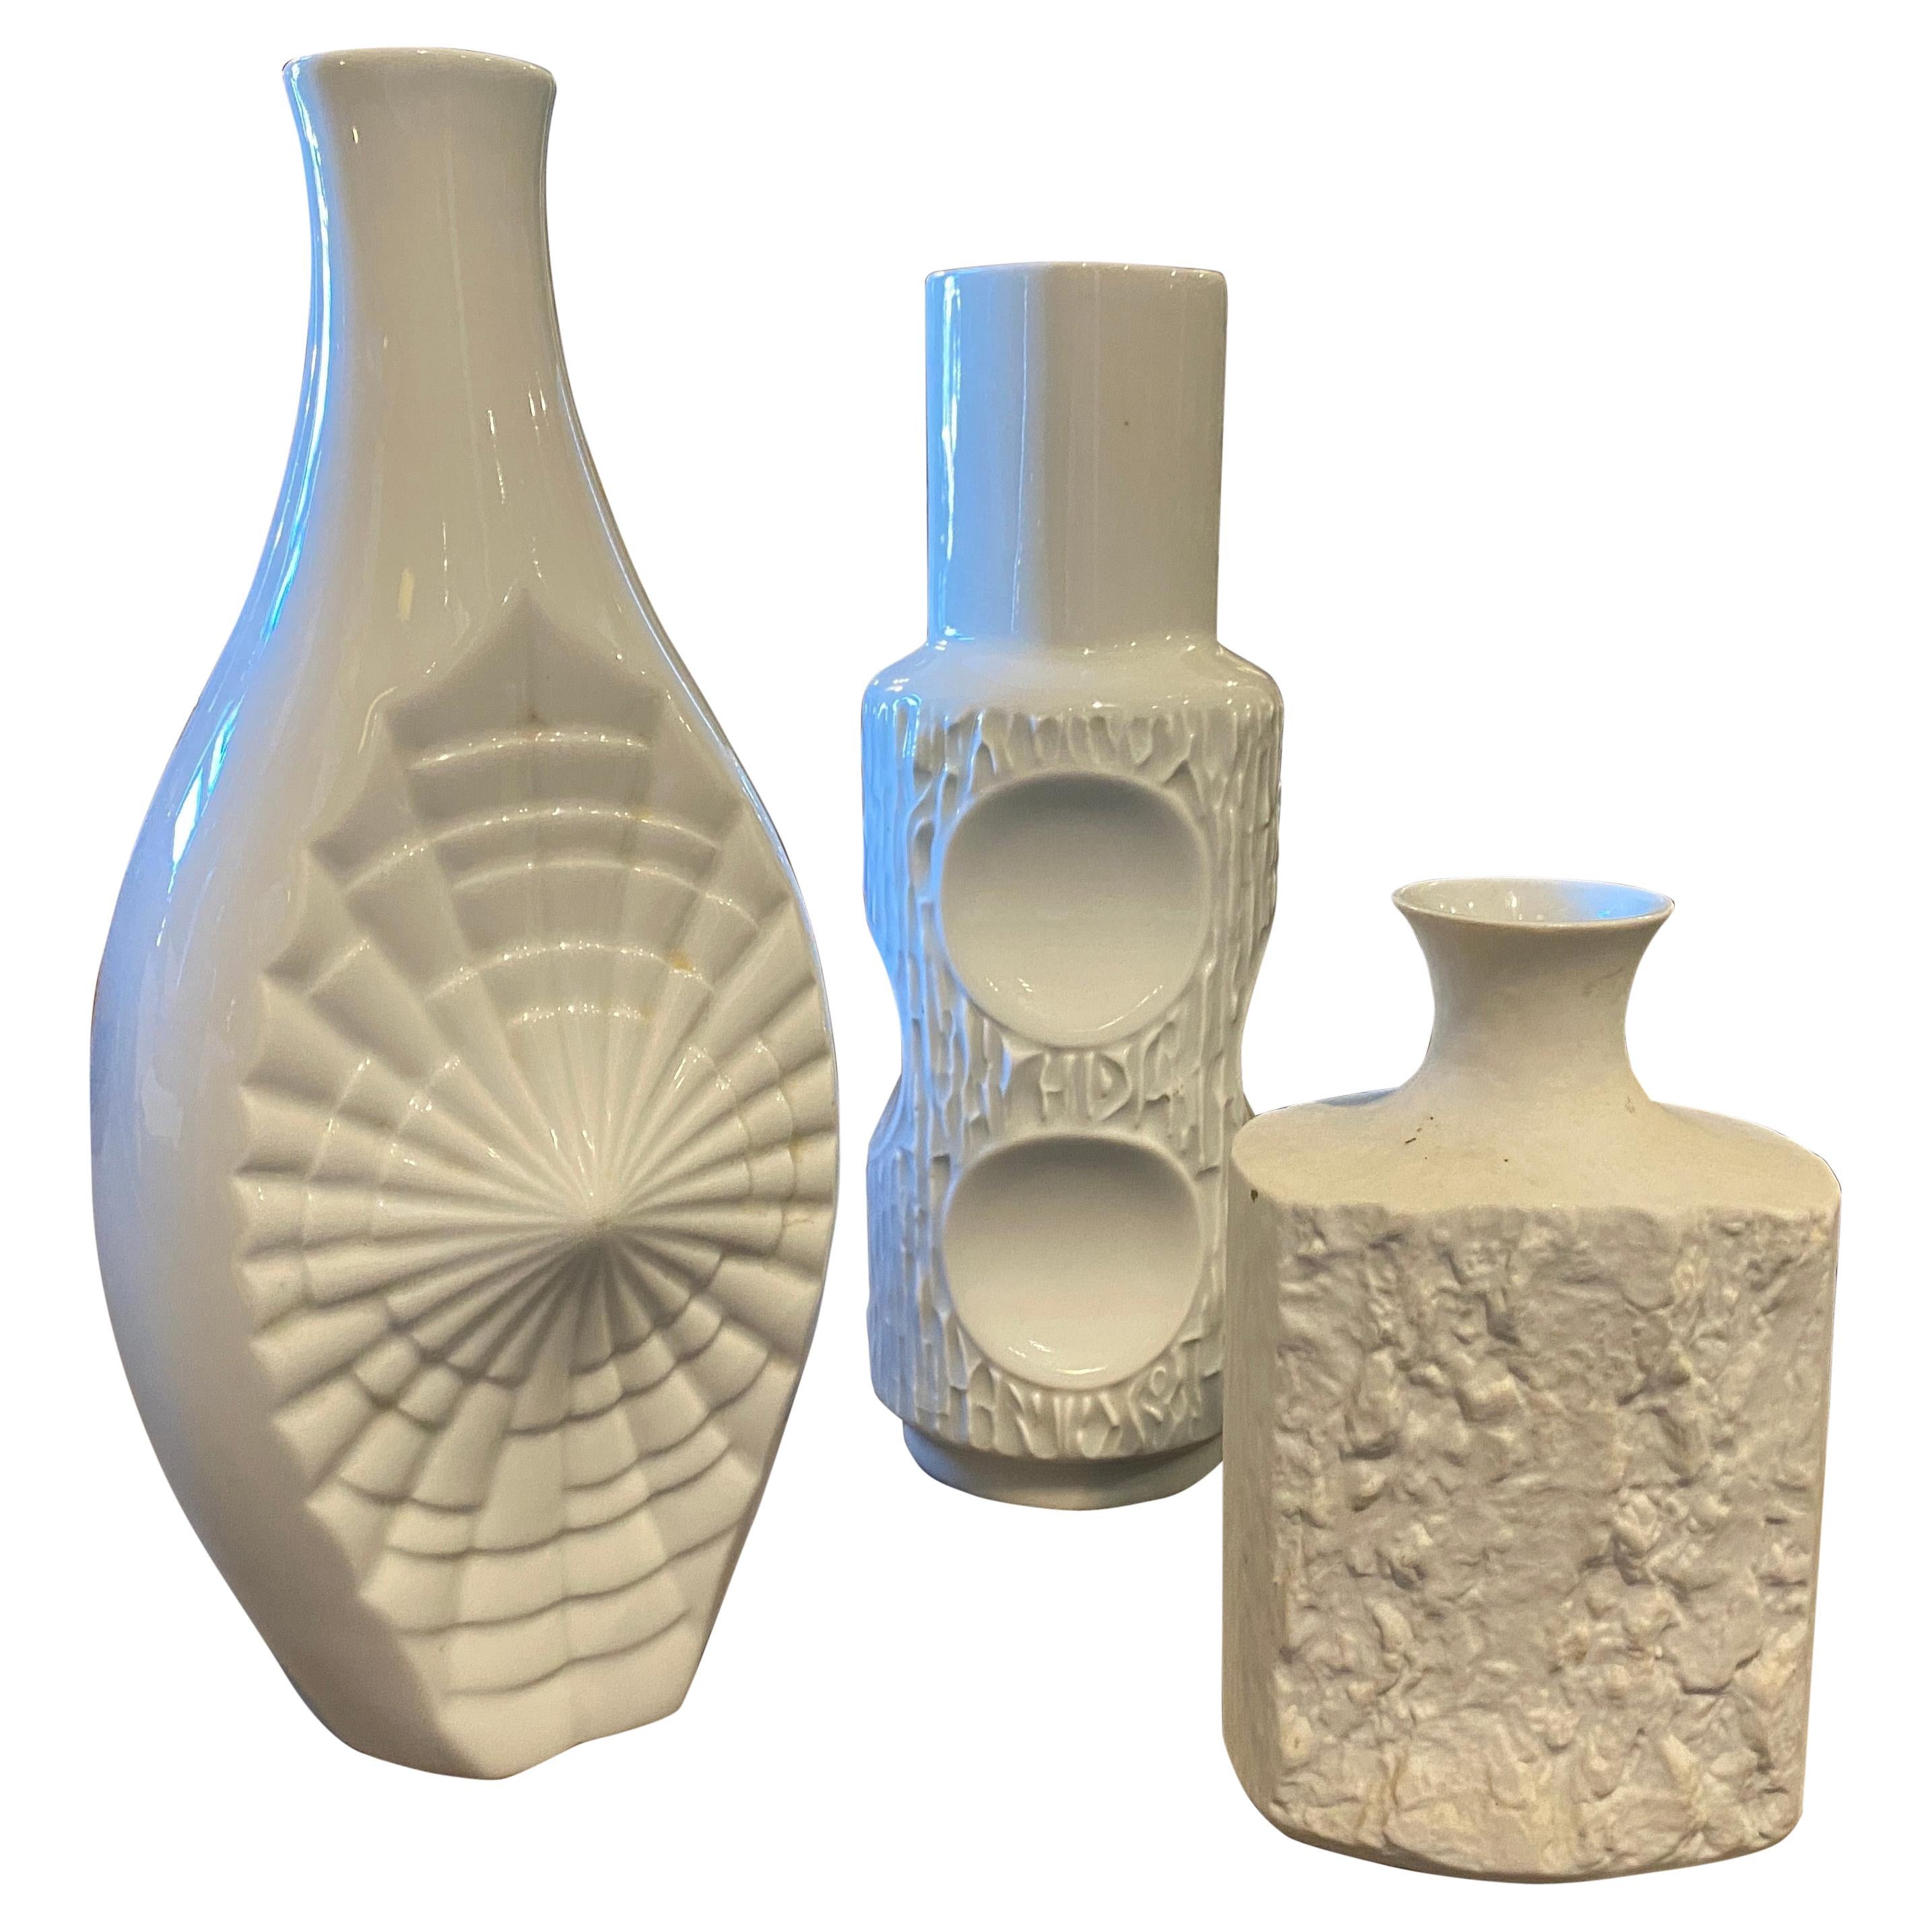 1980s Collection of Three Modernist White Porcelain German Vases